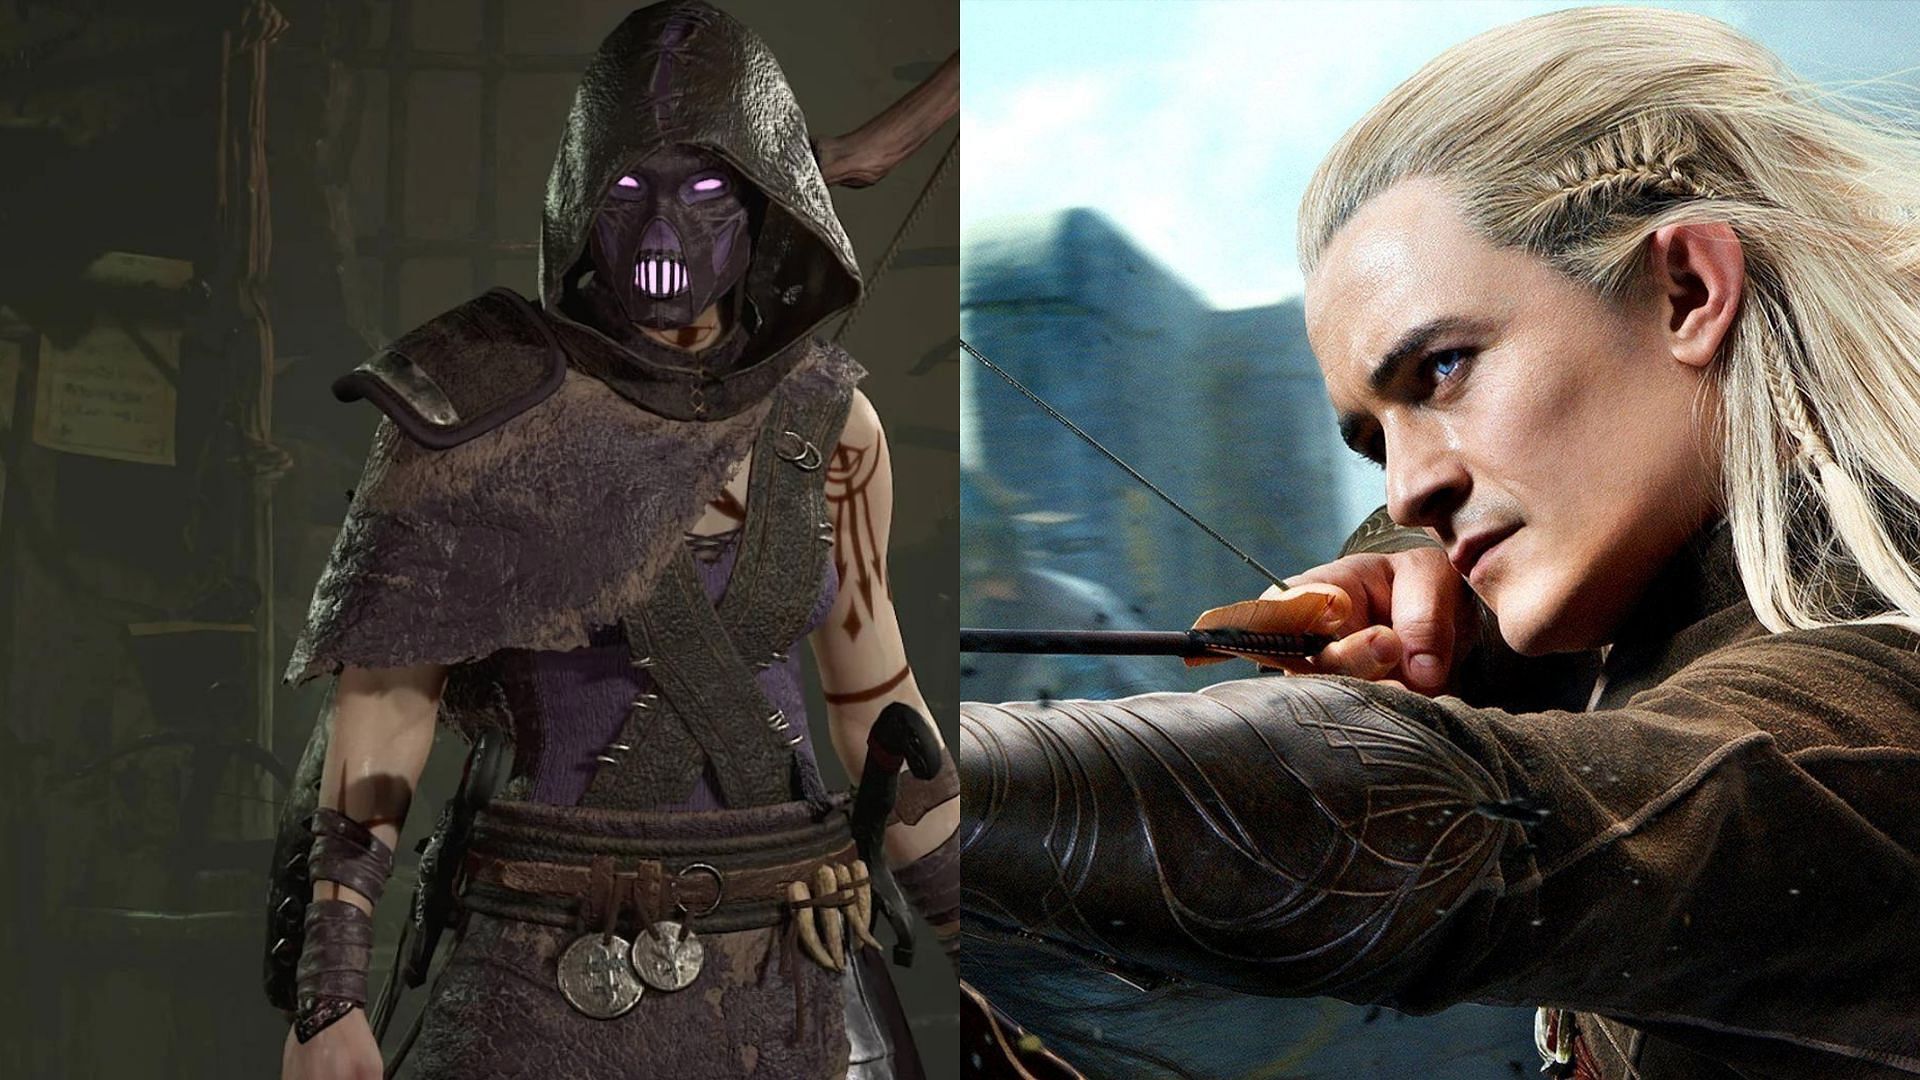 The Rogue and Legolas Side by Side (Images via Blizzard and Embracer)